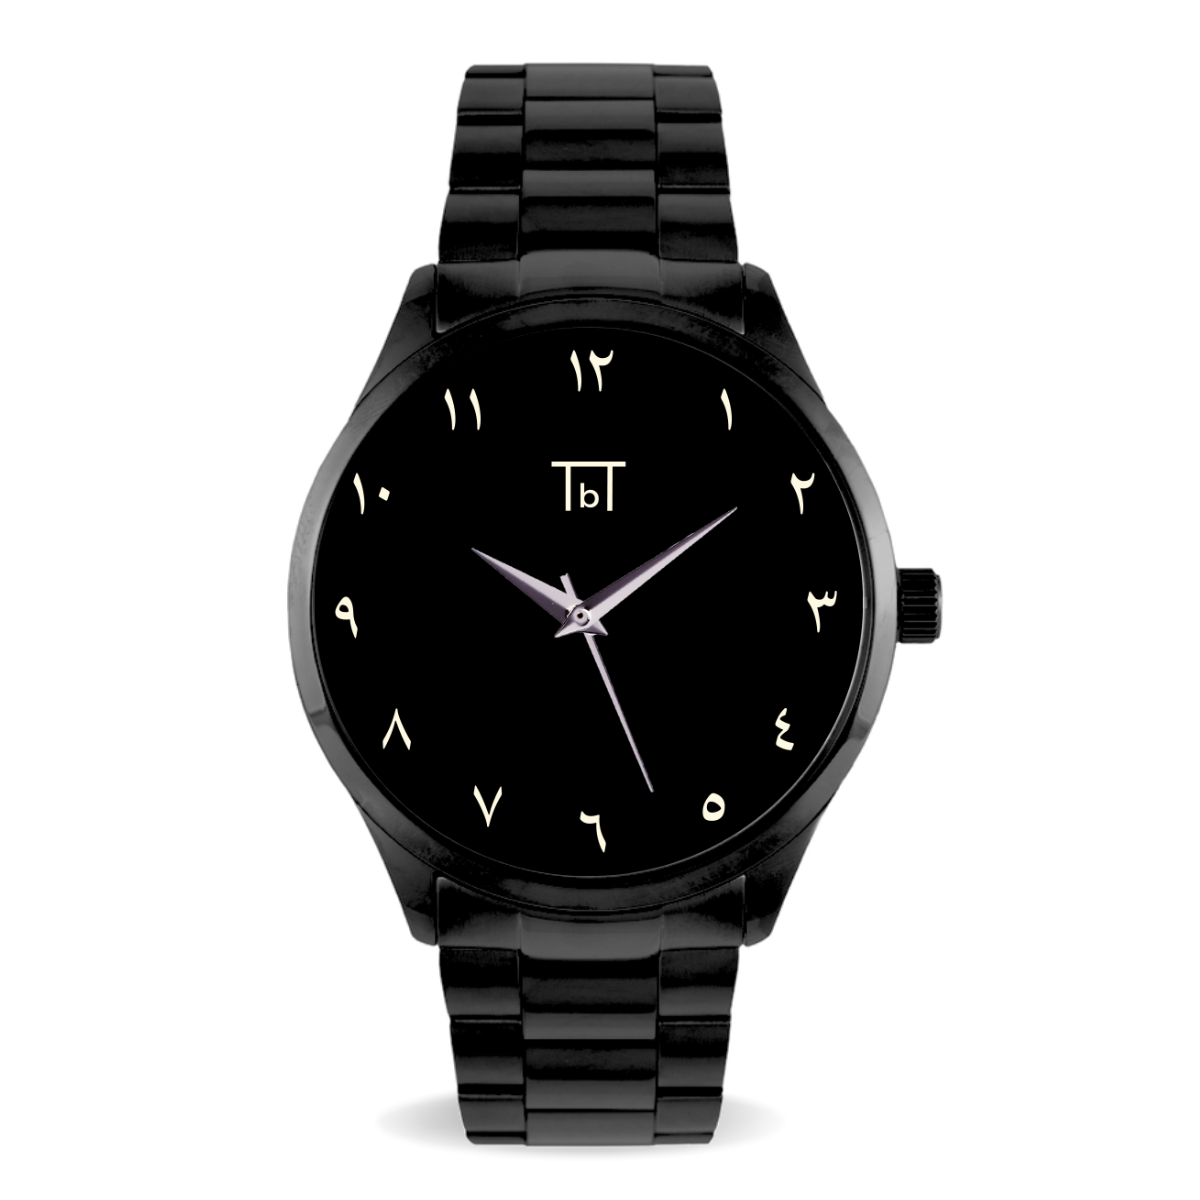 Arabic Dial Watch in Black Stainless Steel FOR HIM